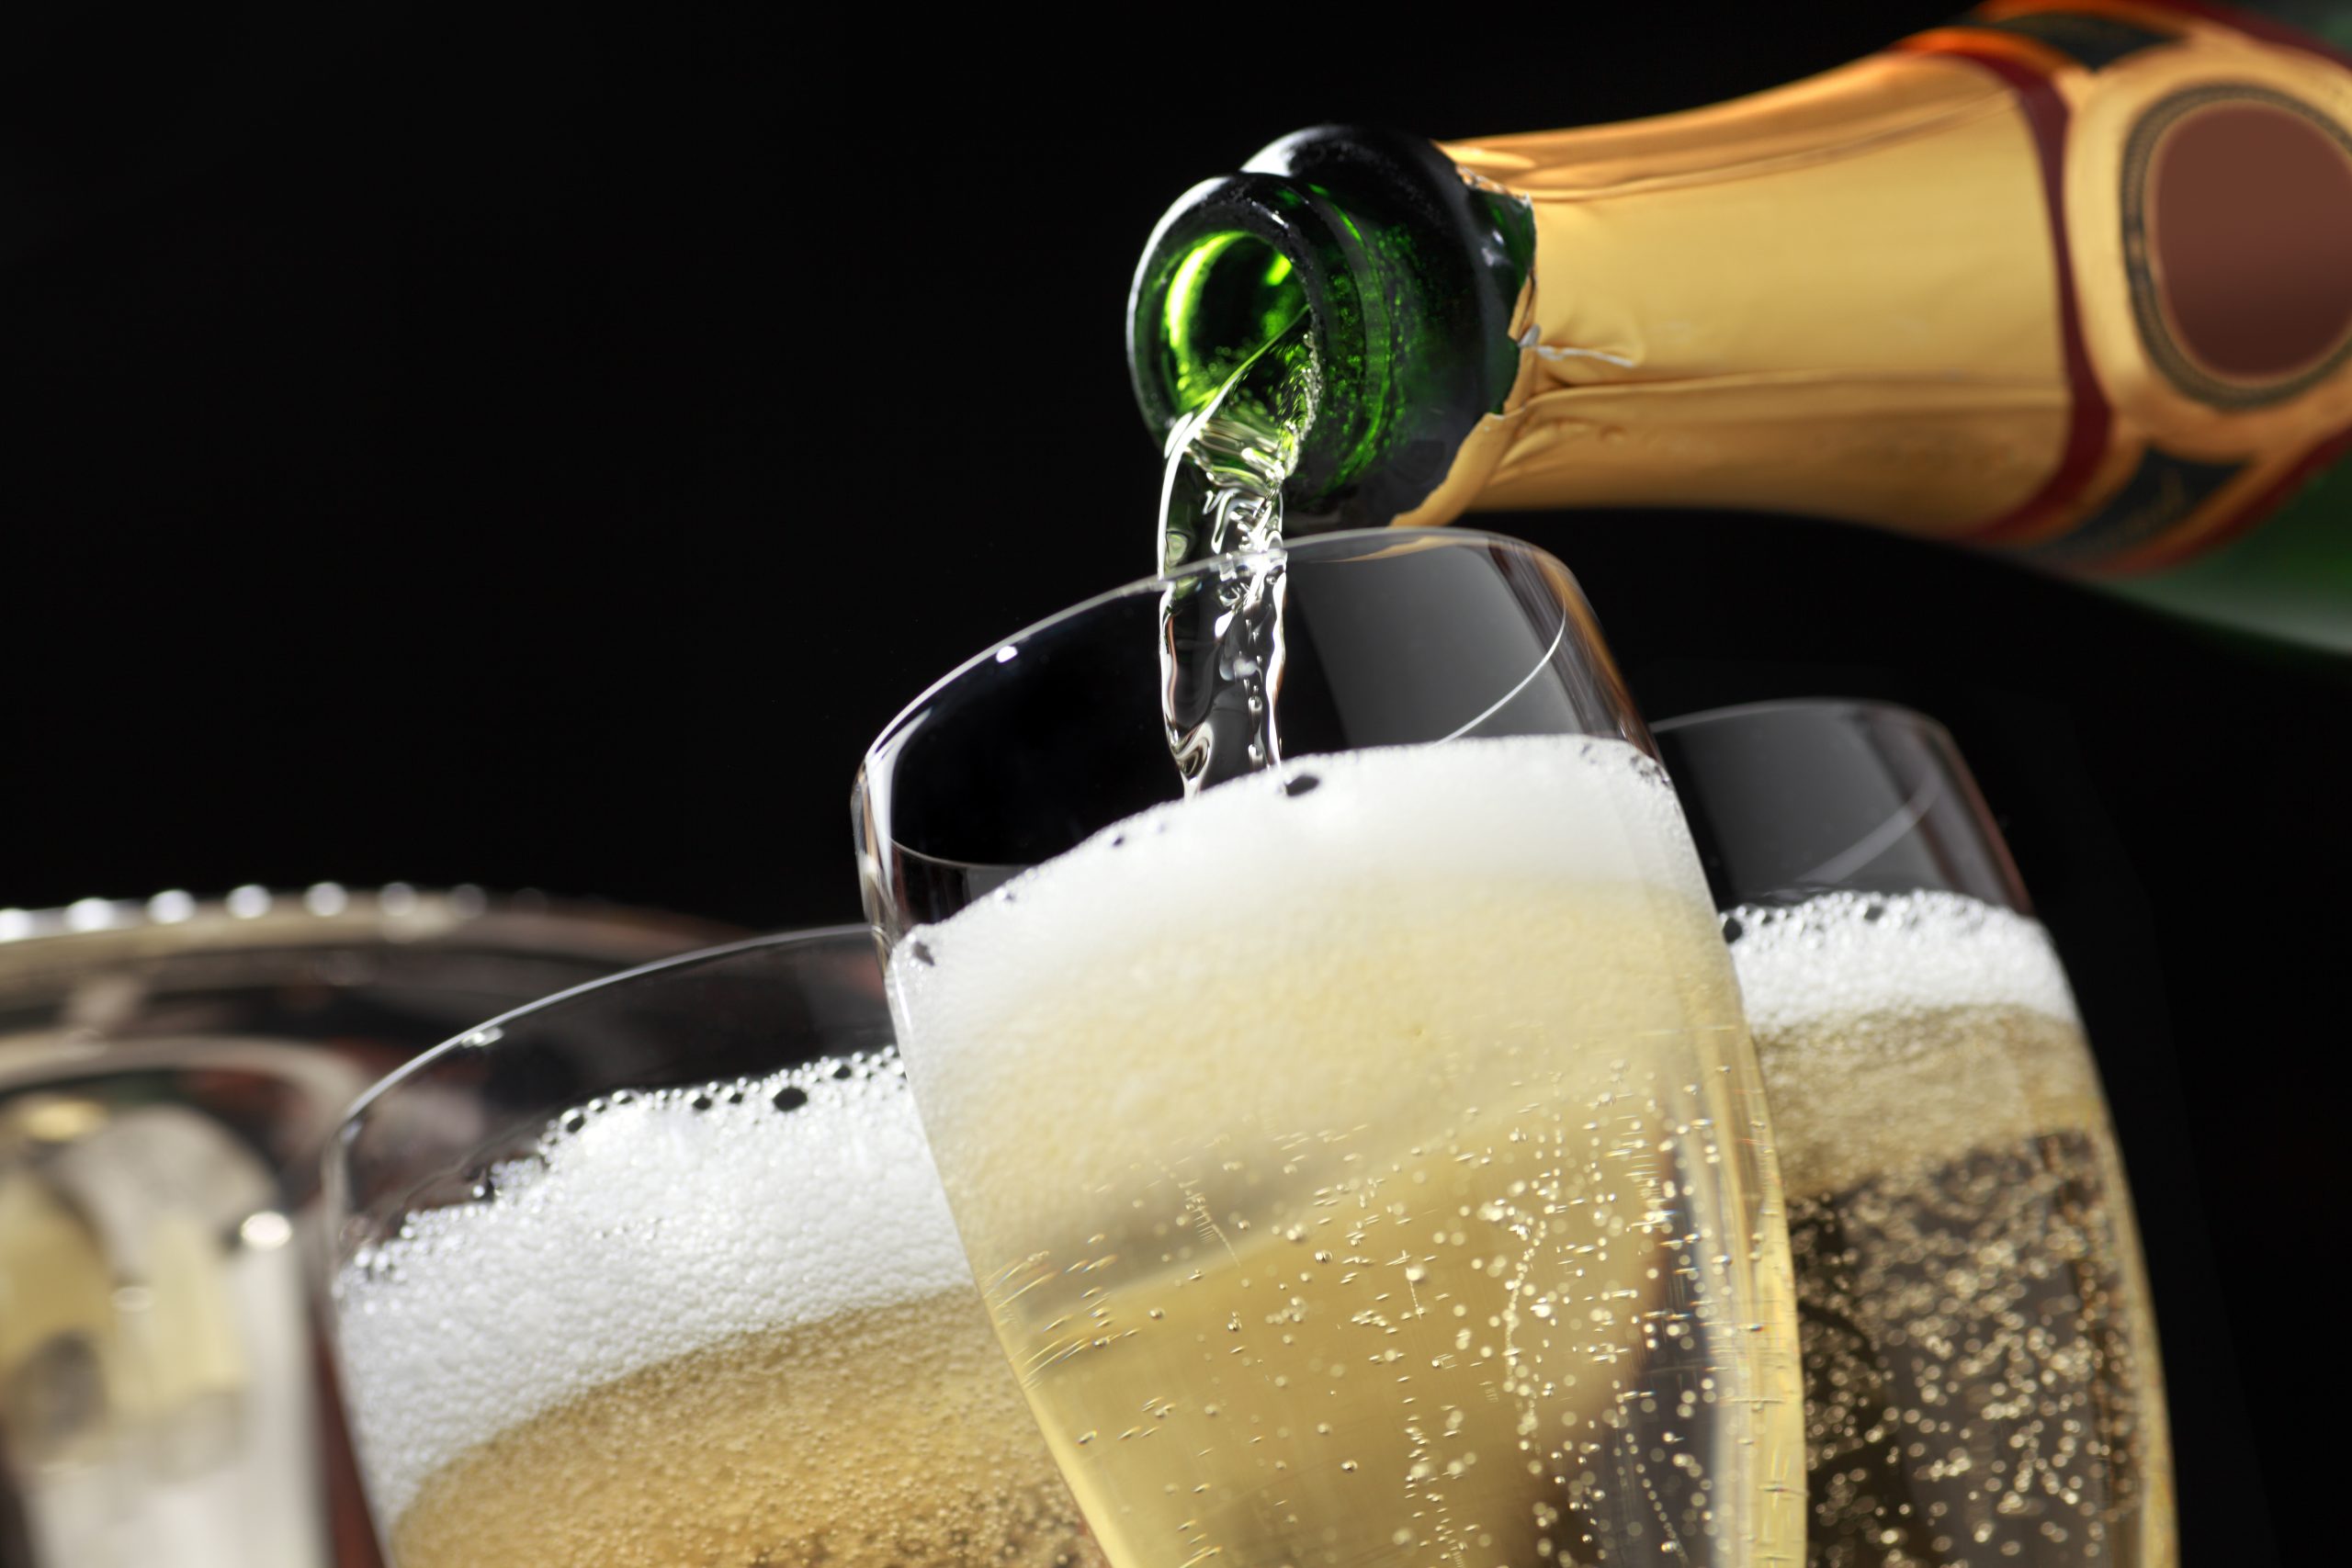 Champagne being poured into champagne glasses: Five top tips for serving a glass of Champagne